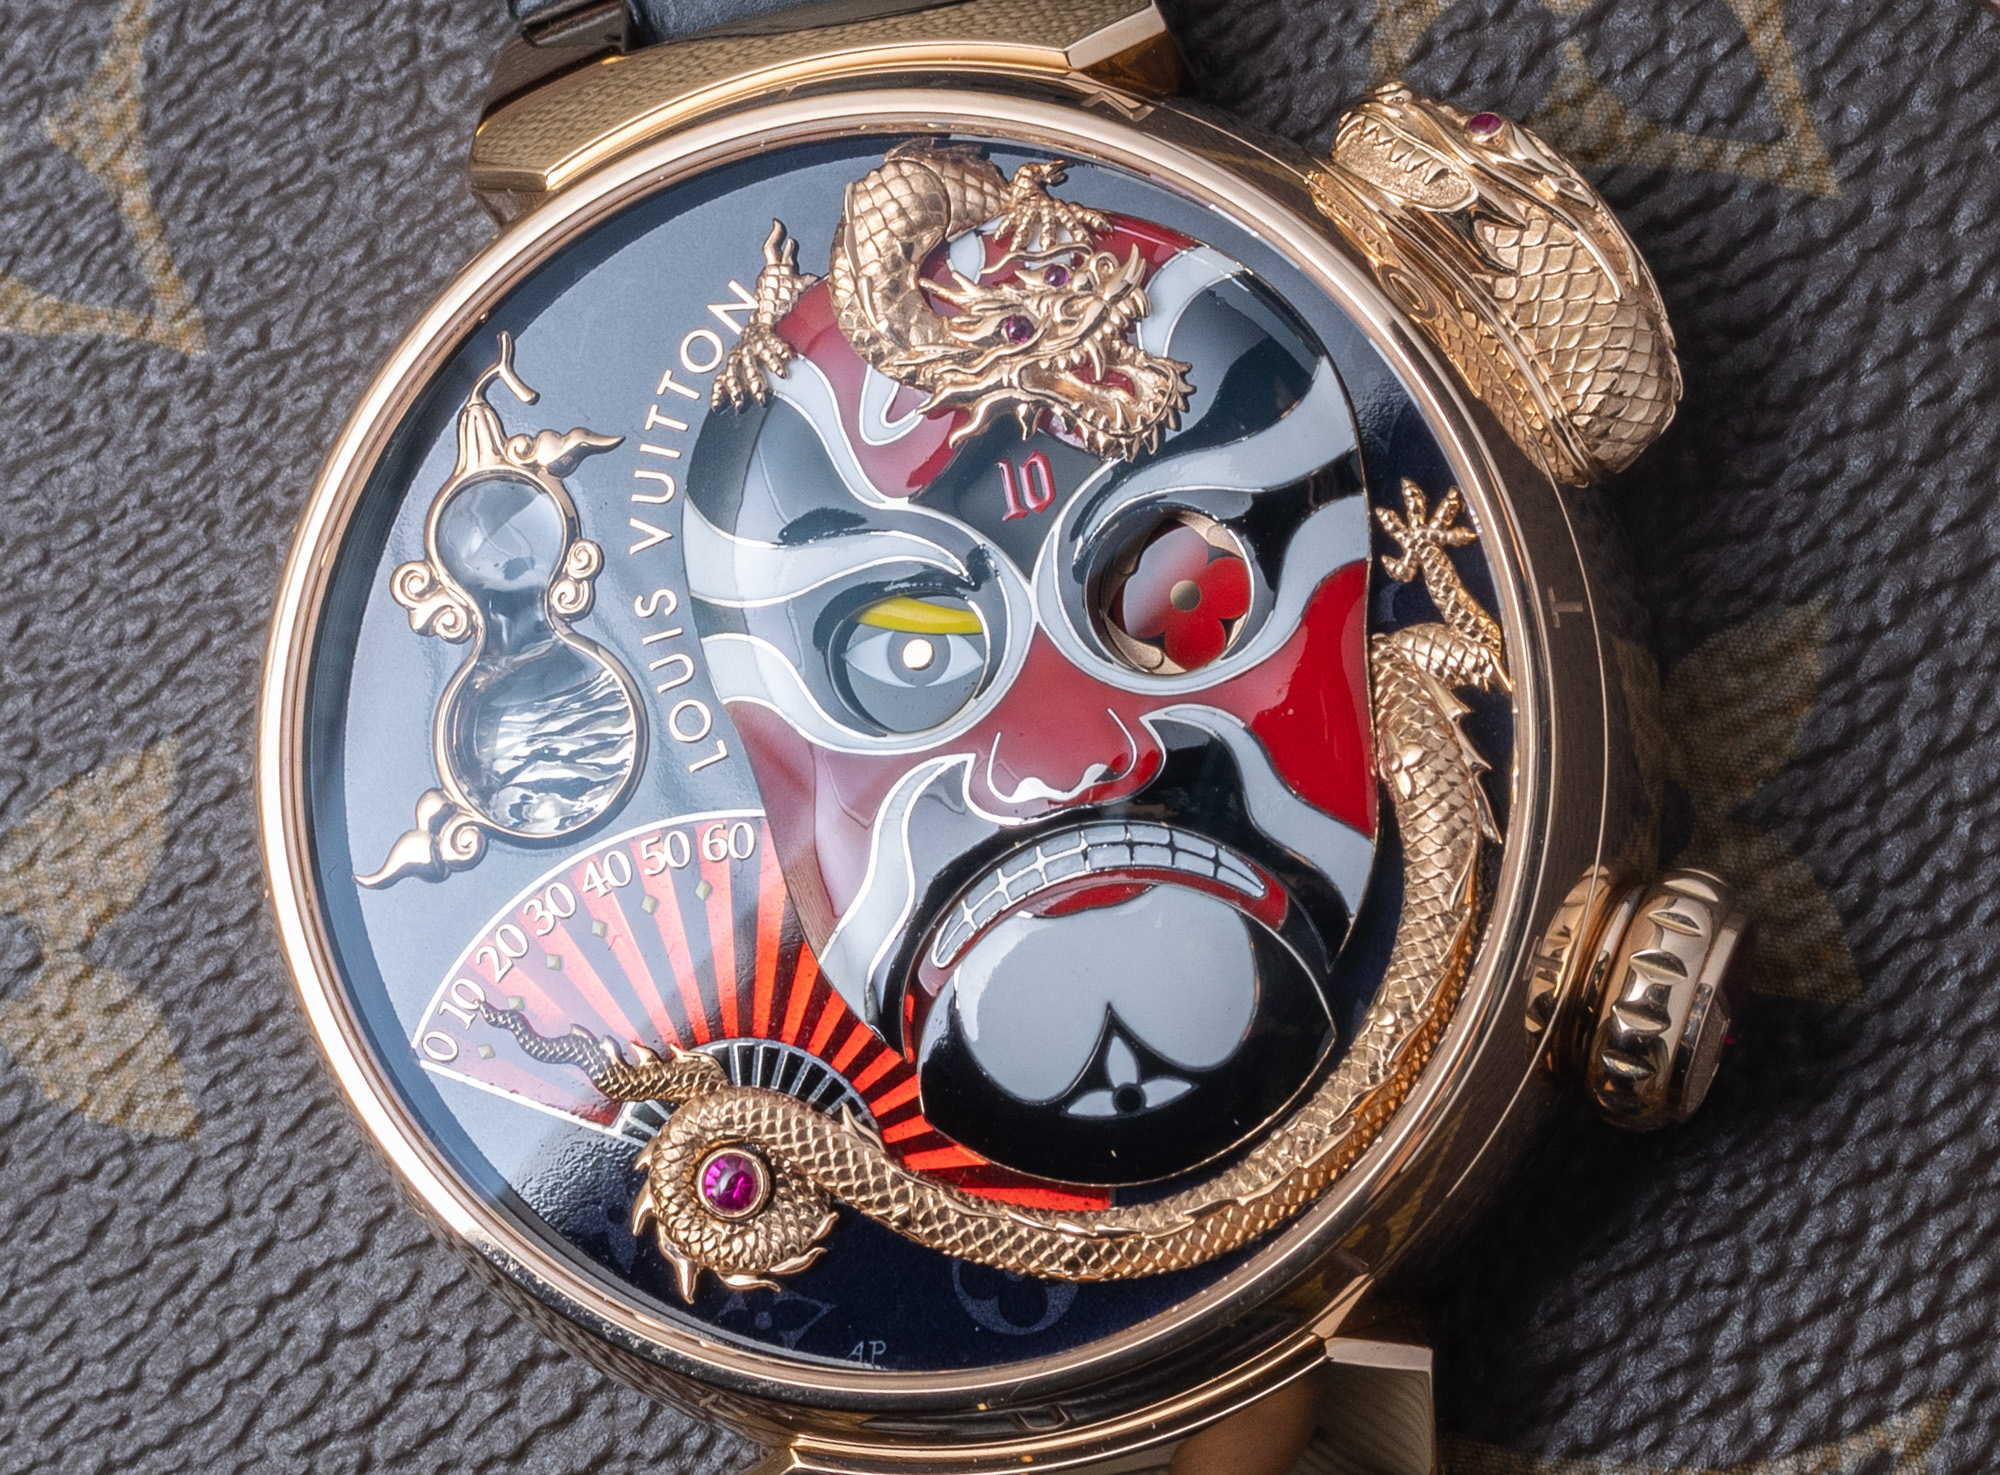 Hands-On: Louis Vuitton Tambour Opera Automata Watch With Dial Inspired By  Sichuan Bian Lian Mask